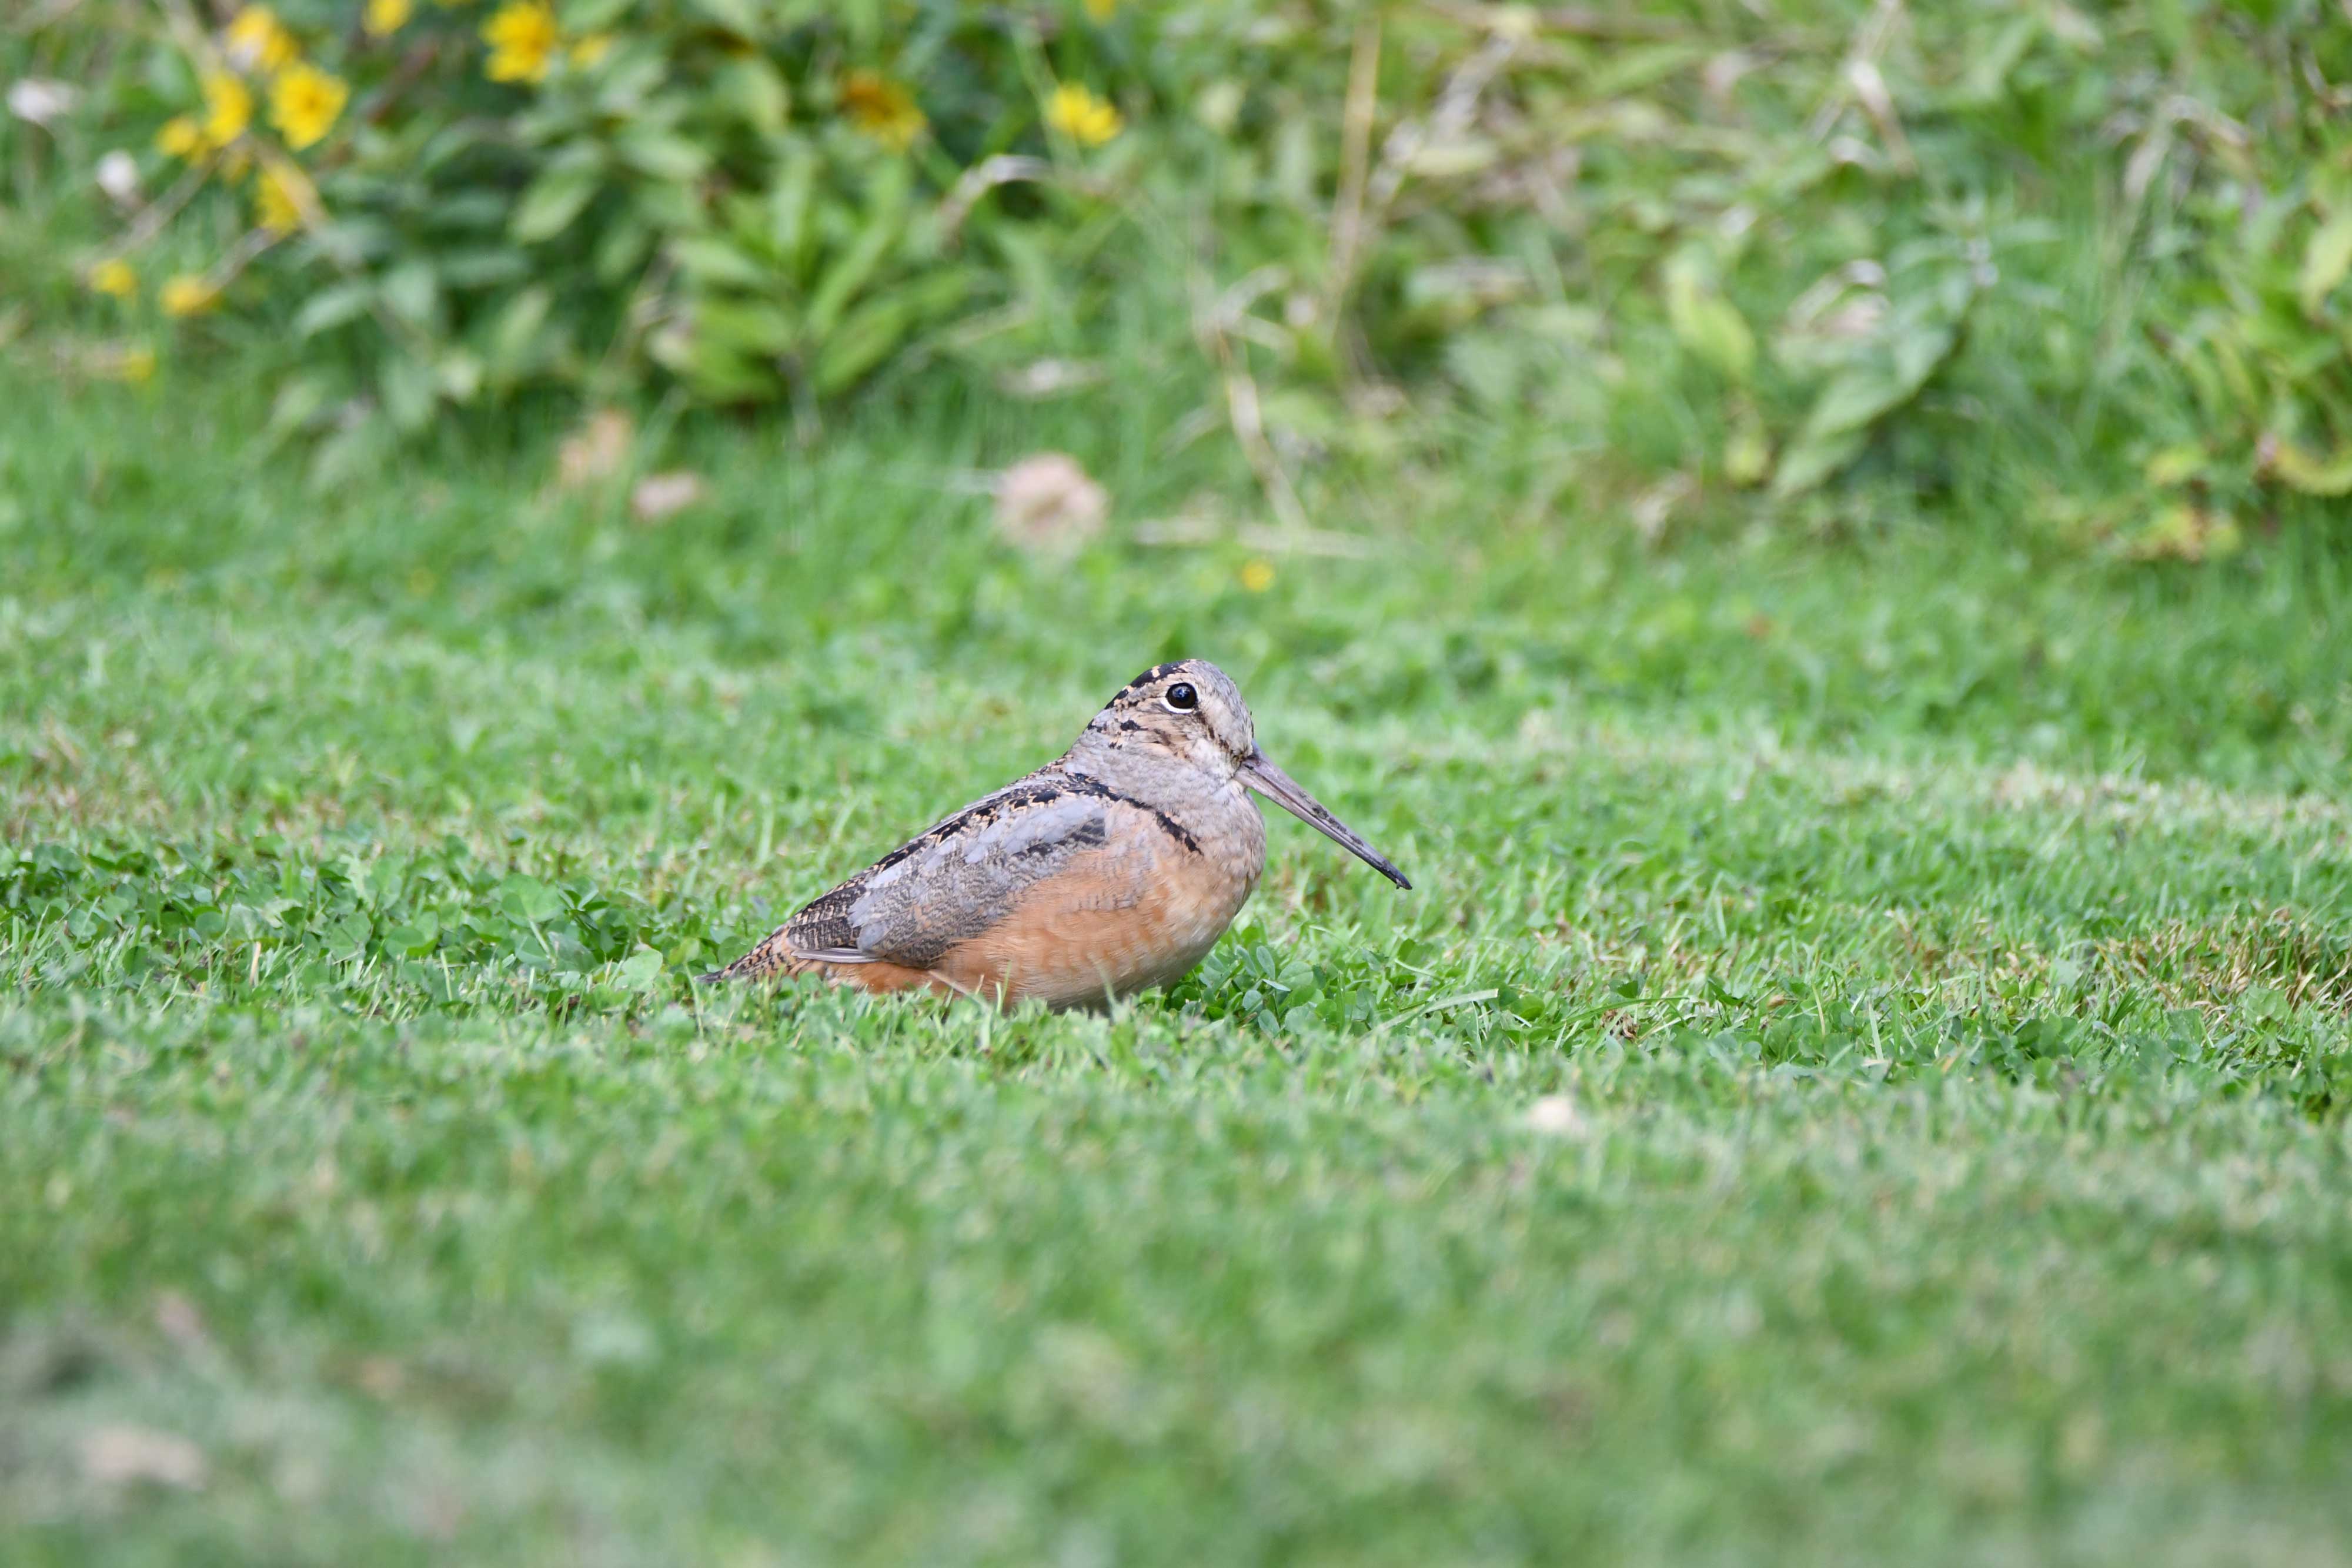 A woodcock in the grass